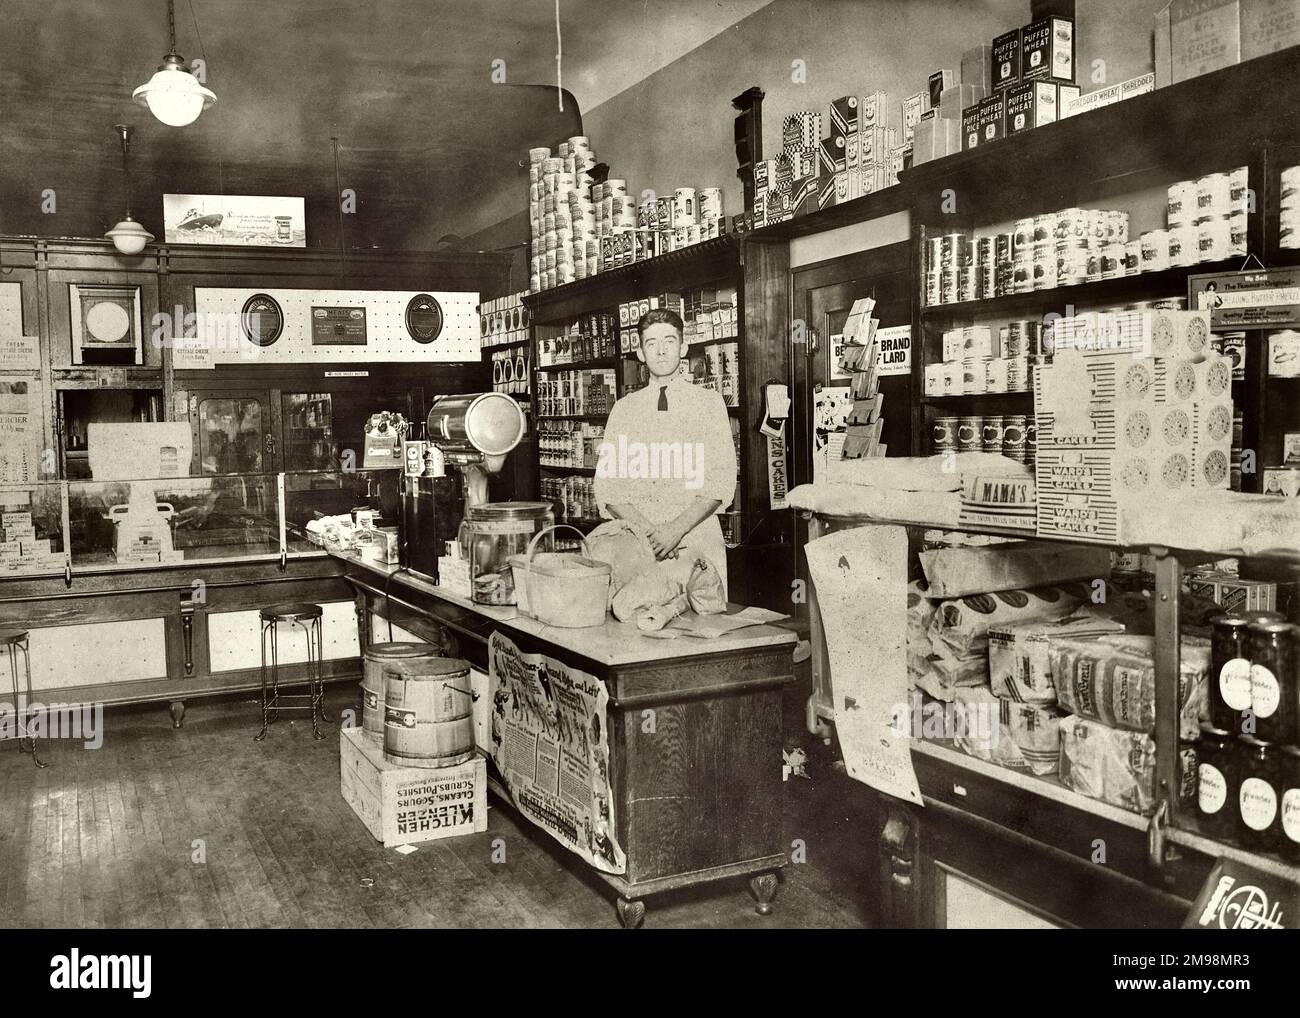 General Store early 1900s,  Corner Store, Old Fashioned Grocery Store Stock Photo